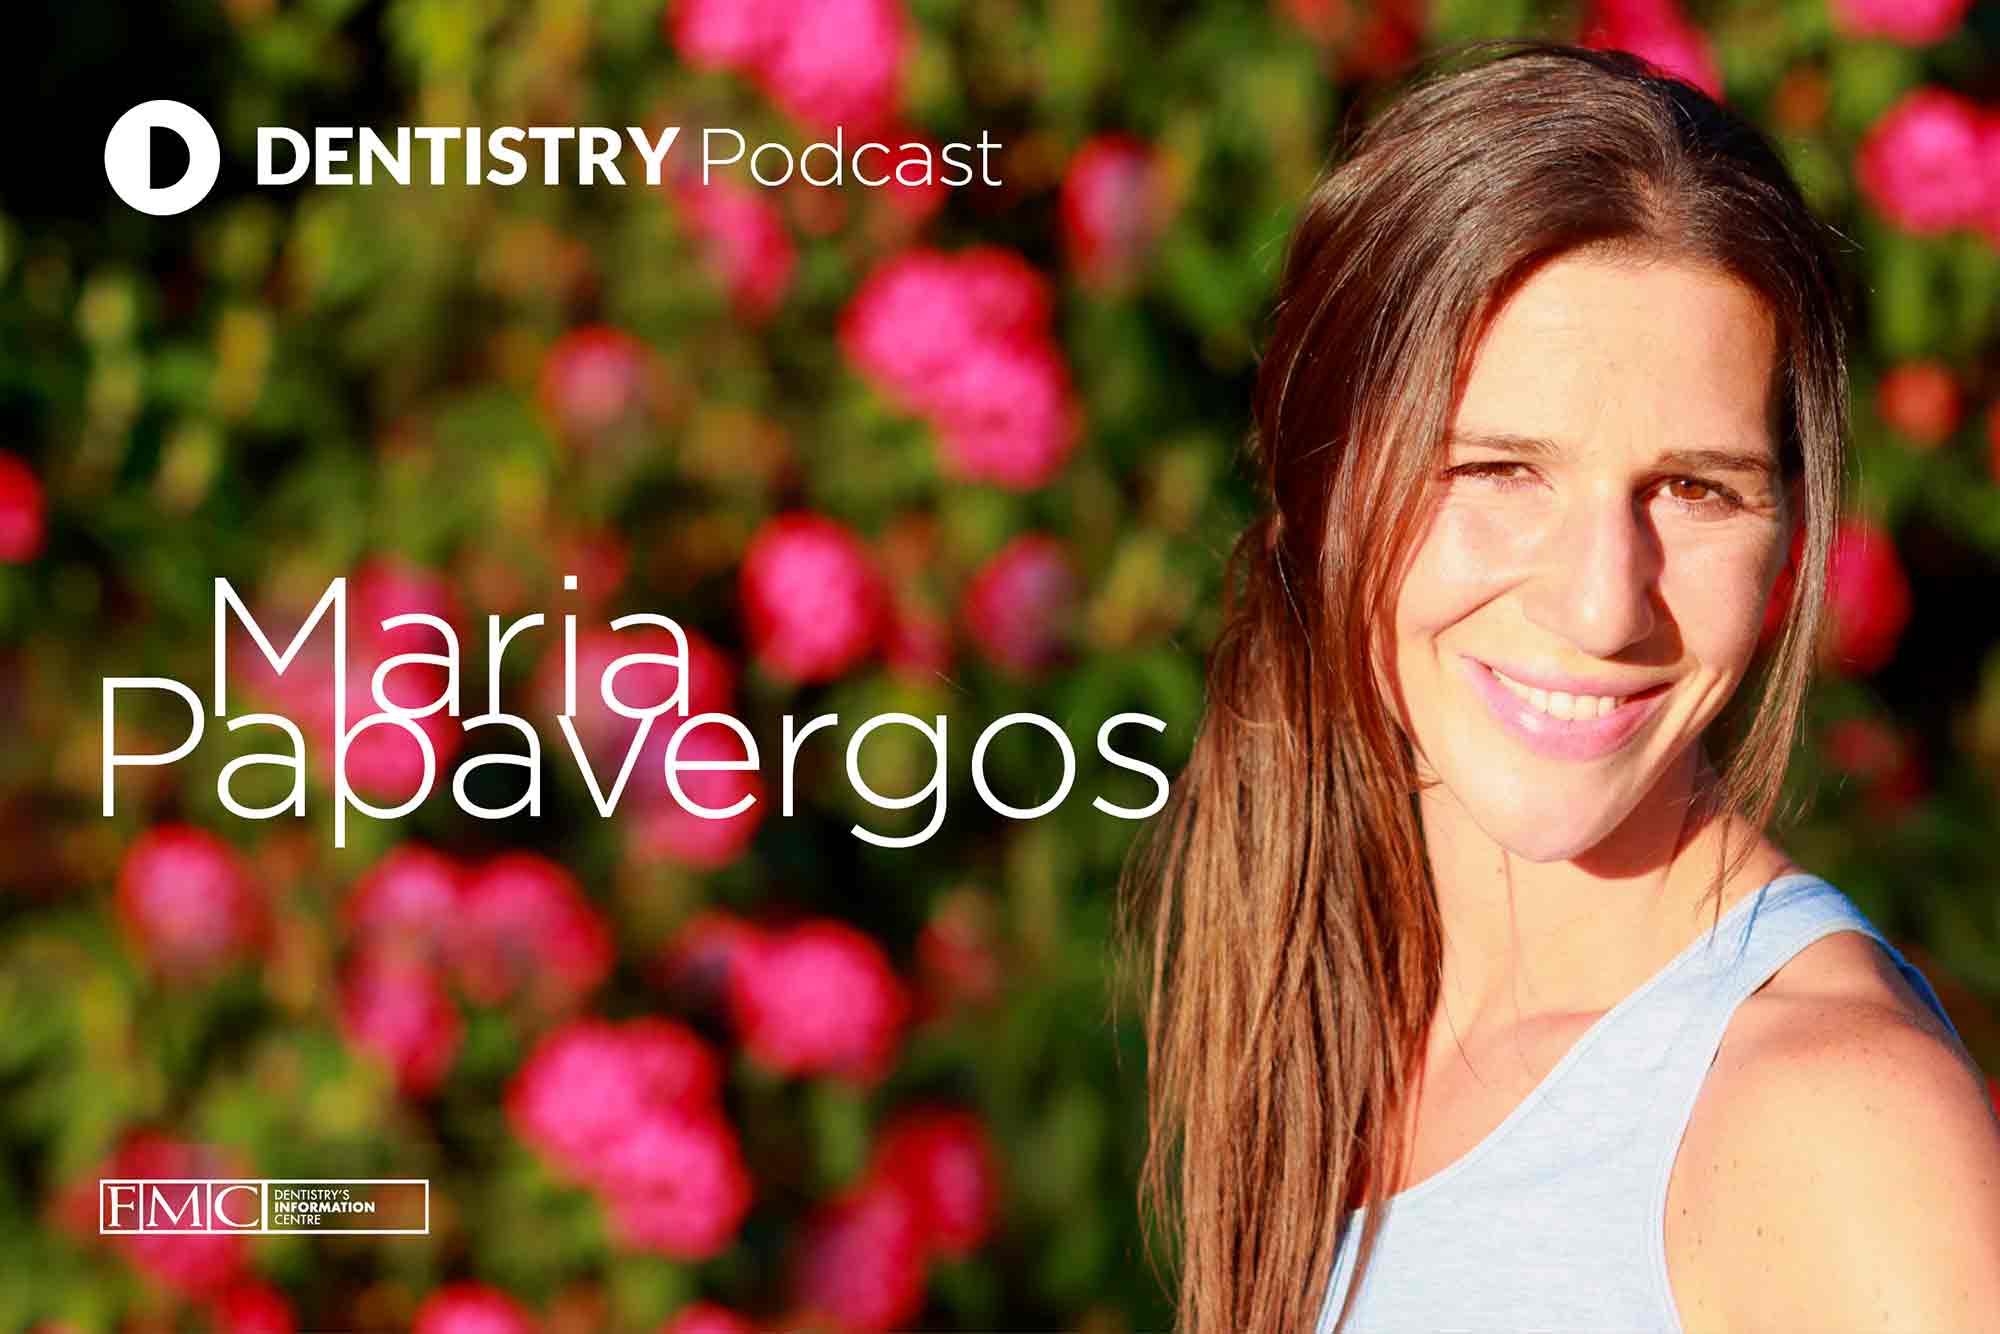 Maria Papavergos speaks to Dentistry Online about why she thinks dental teams need to be talking to patients about veganism